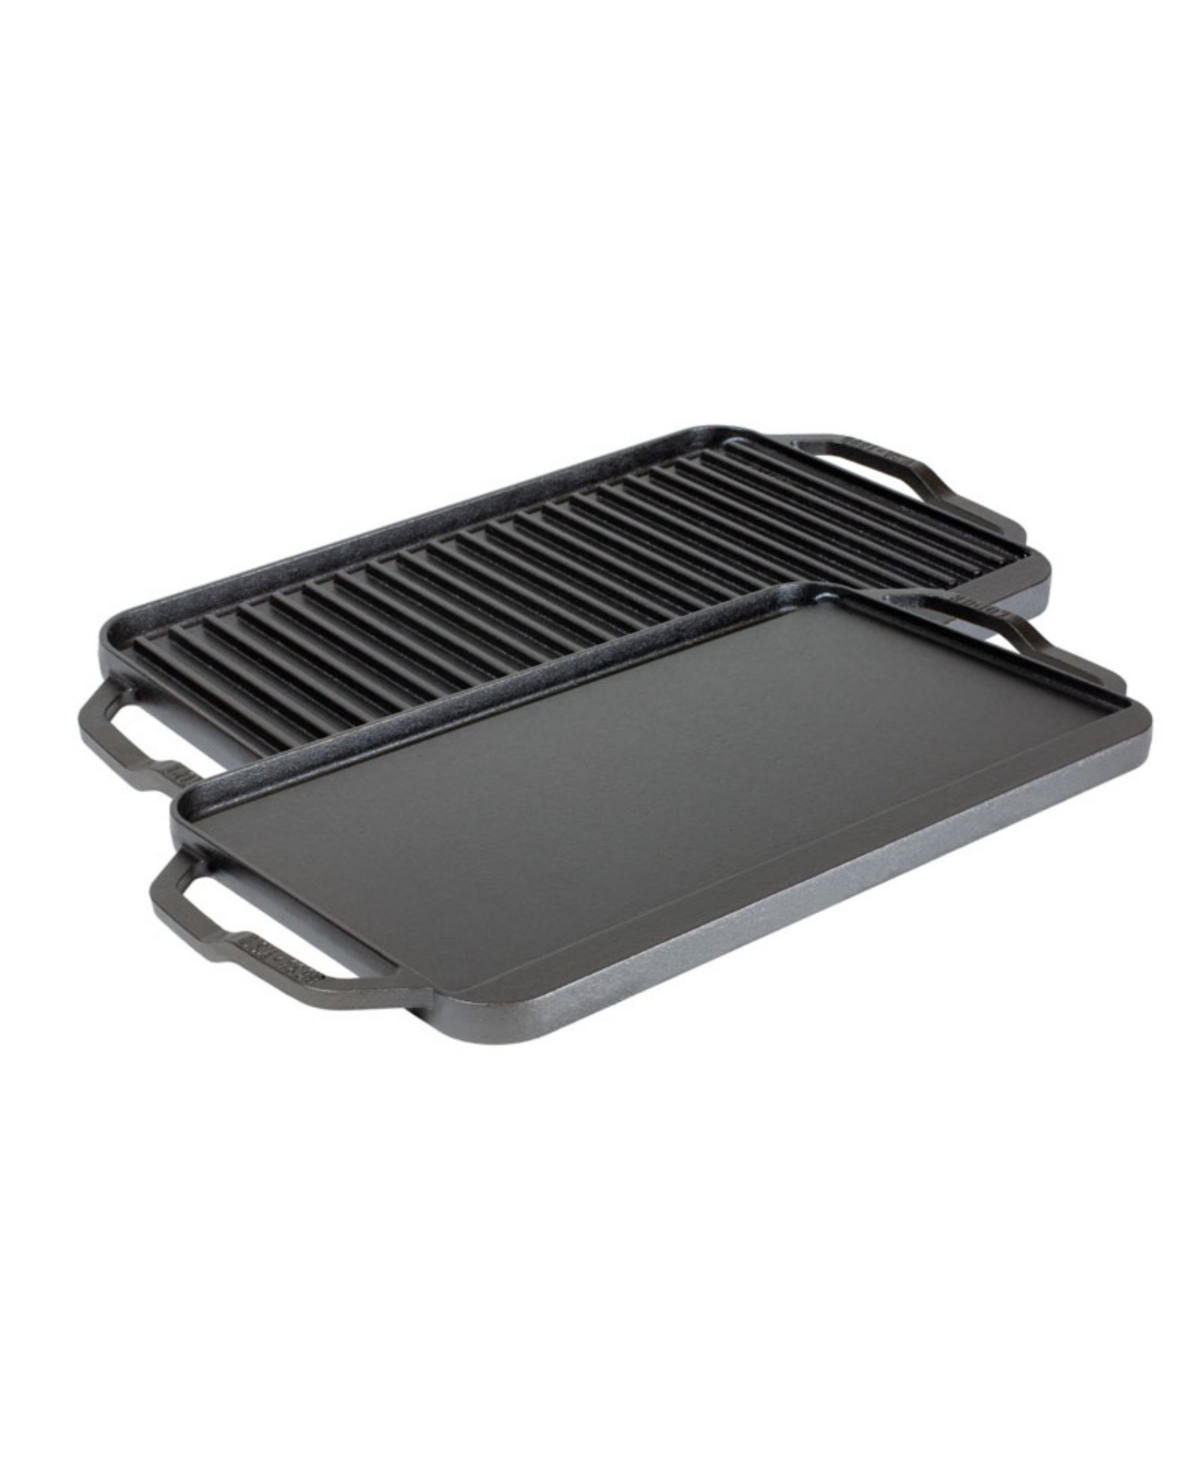 Lodge Cast Iron Chef Collection 10" Chef Style Rectangle Reversible Grill, Griddle Cookware In Black